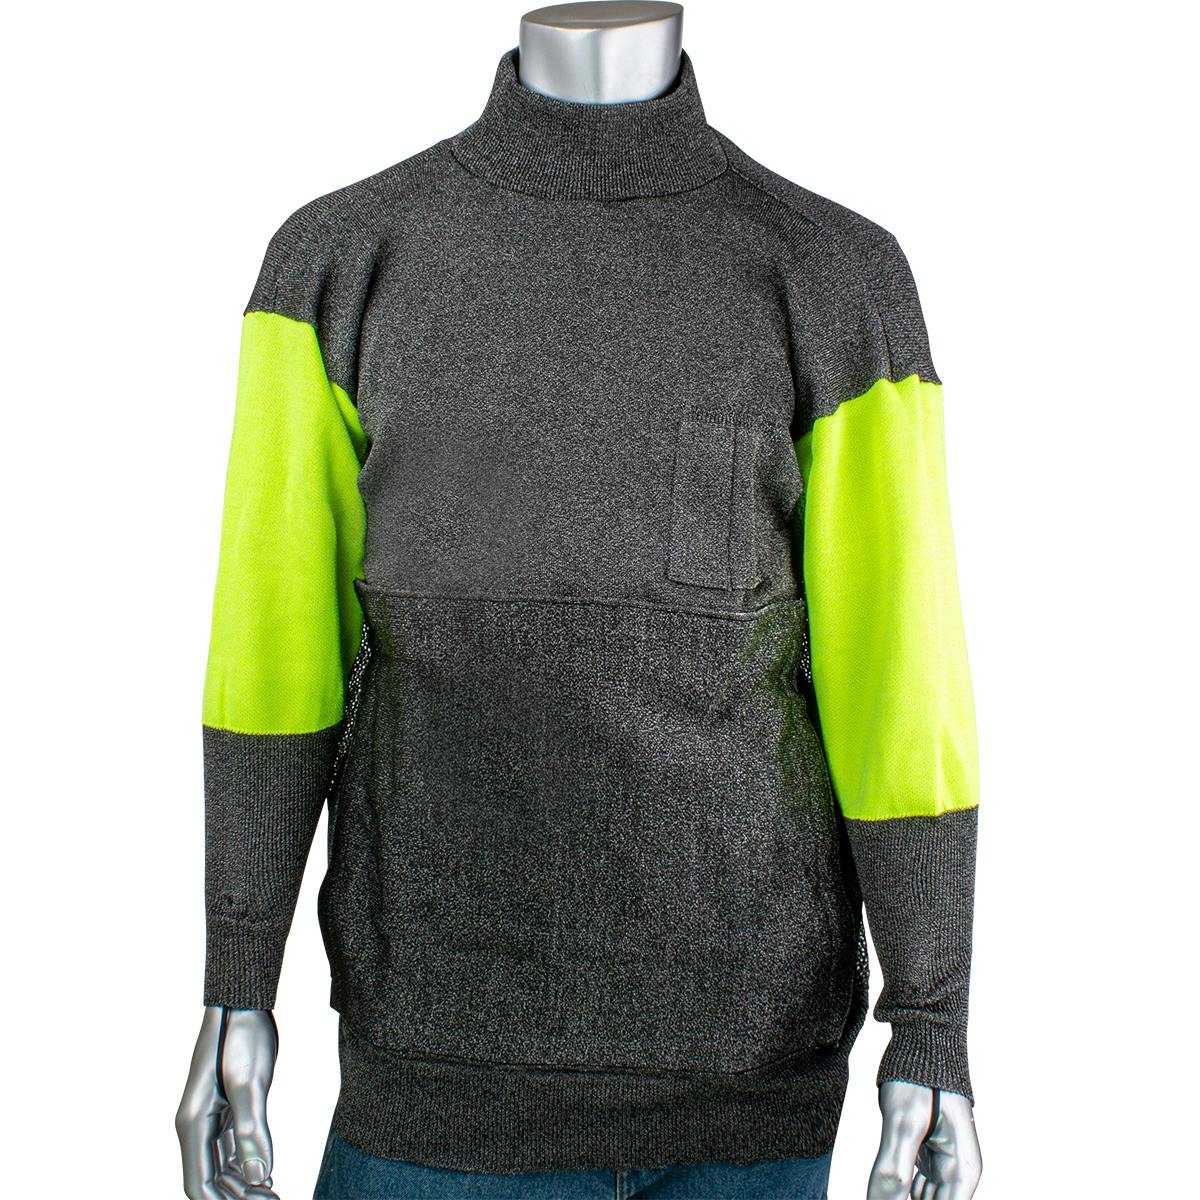 ATA® Blended Cut Resistant Pullover with Removable Belly Patch, Hi-Vis Sleeves and Thumb Loops, Dark Gray (P190BP-PP1-TL)_1